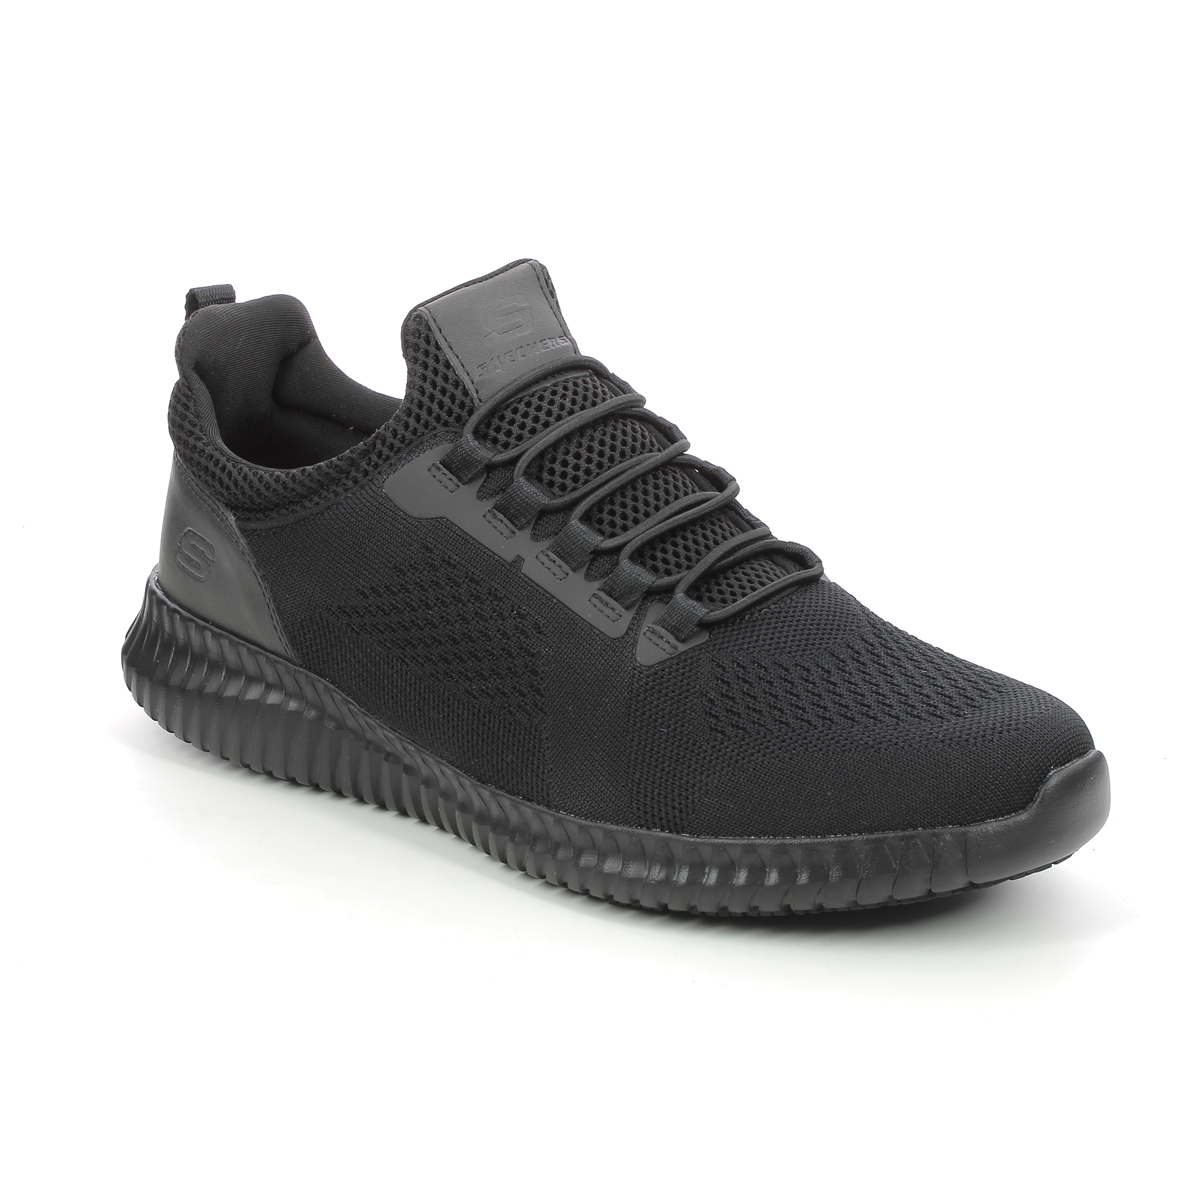 Skechers Work Trainer Cessnock Relaxed Black Mens Trainers 77188Ec In Size 11 In Plain Black